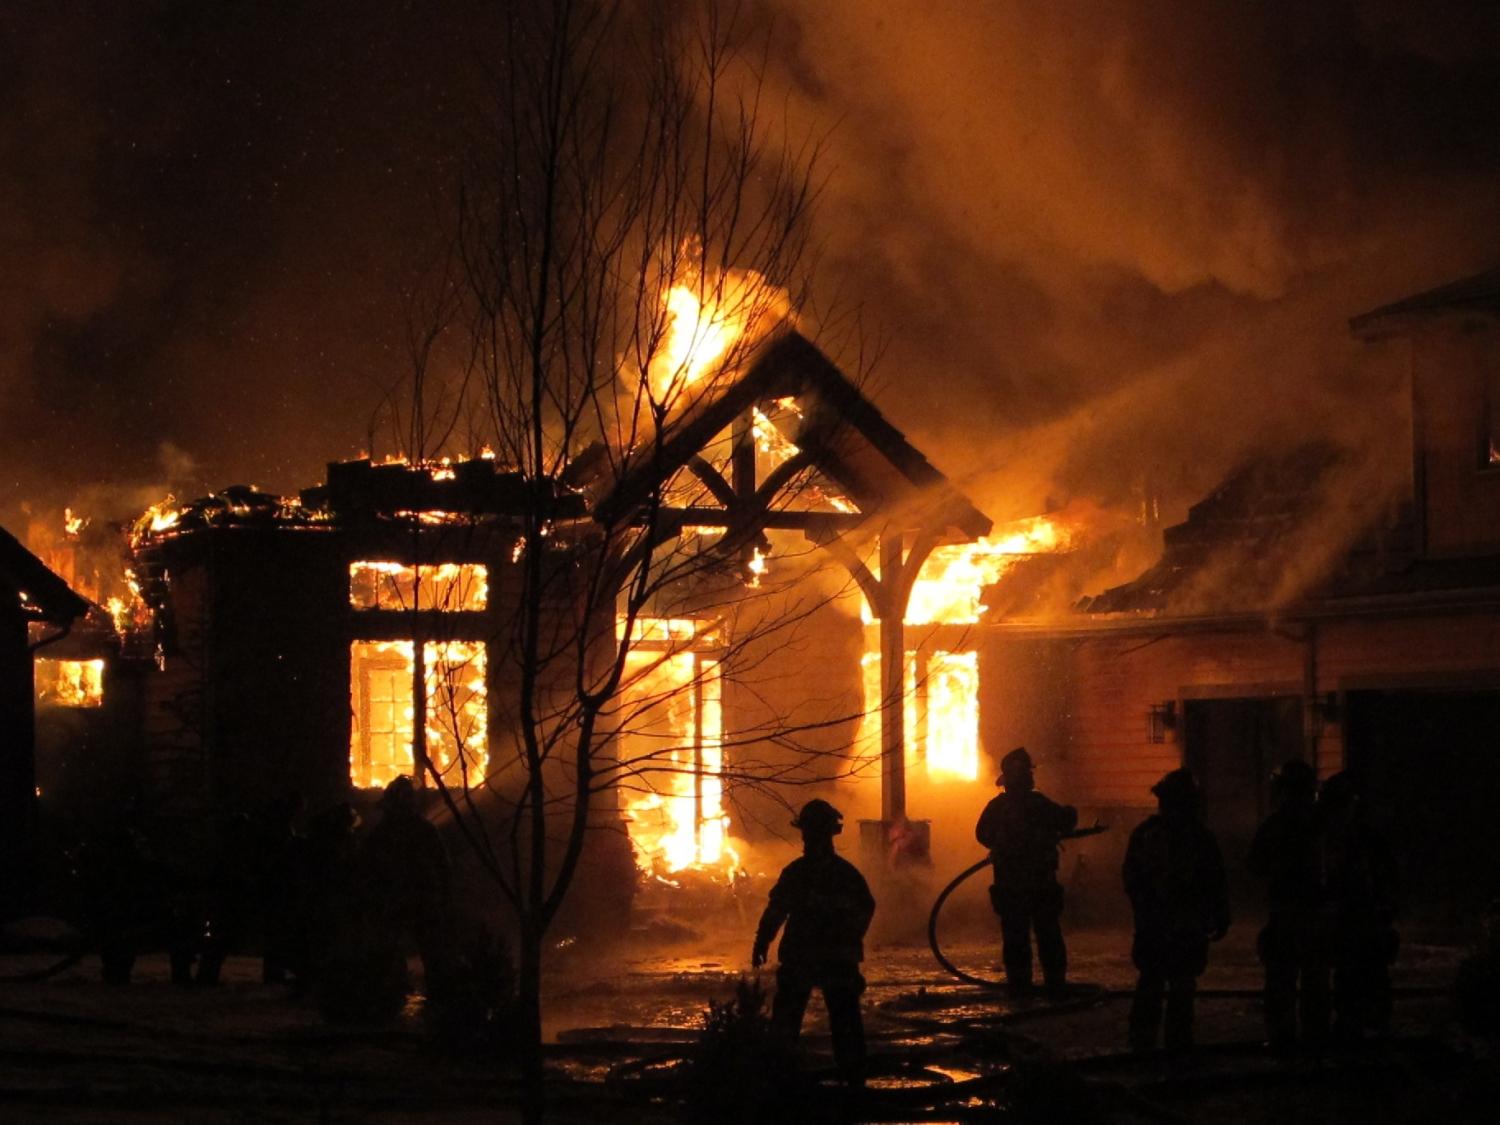 Common Fire Hazards in Your Home